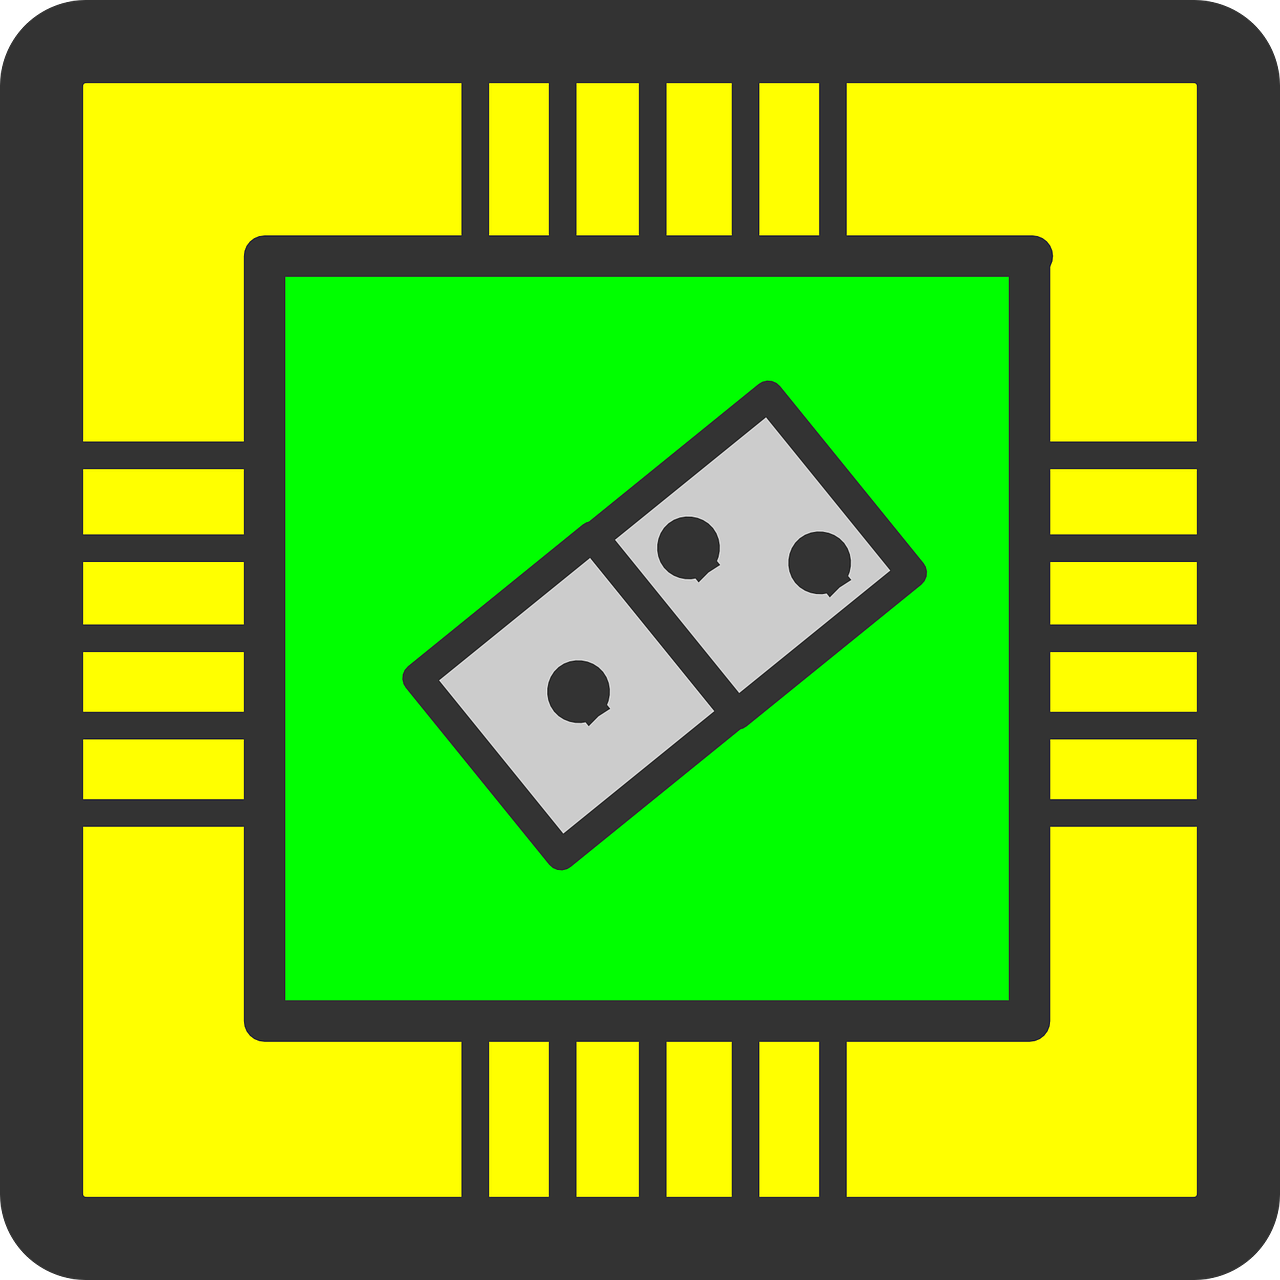 a computer chip on a green and yellow background, a computer rendering, inspired by Josef Block, reddit, computer art, on a flat color black background, batteries not included, aztec, game board